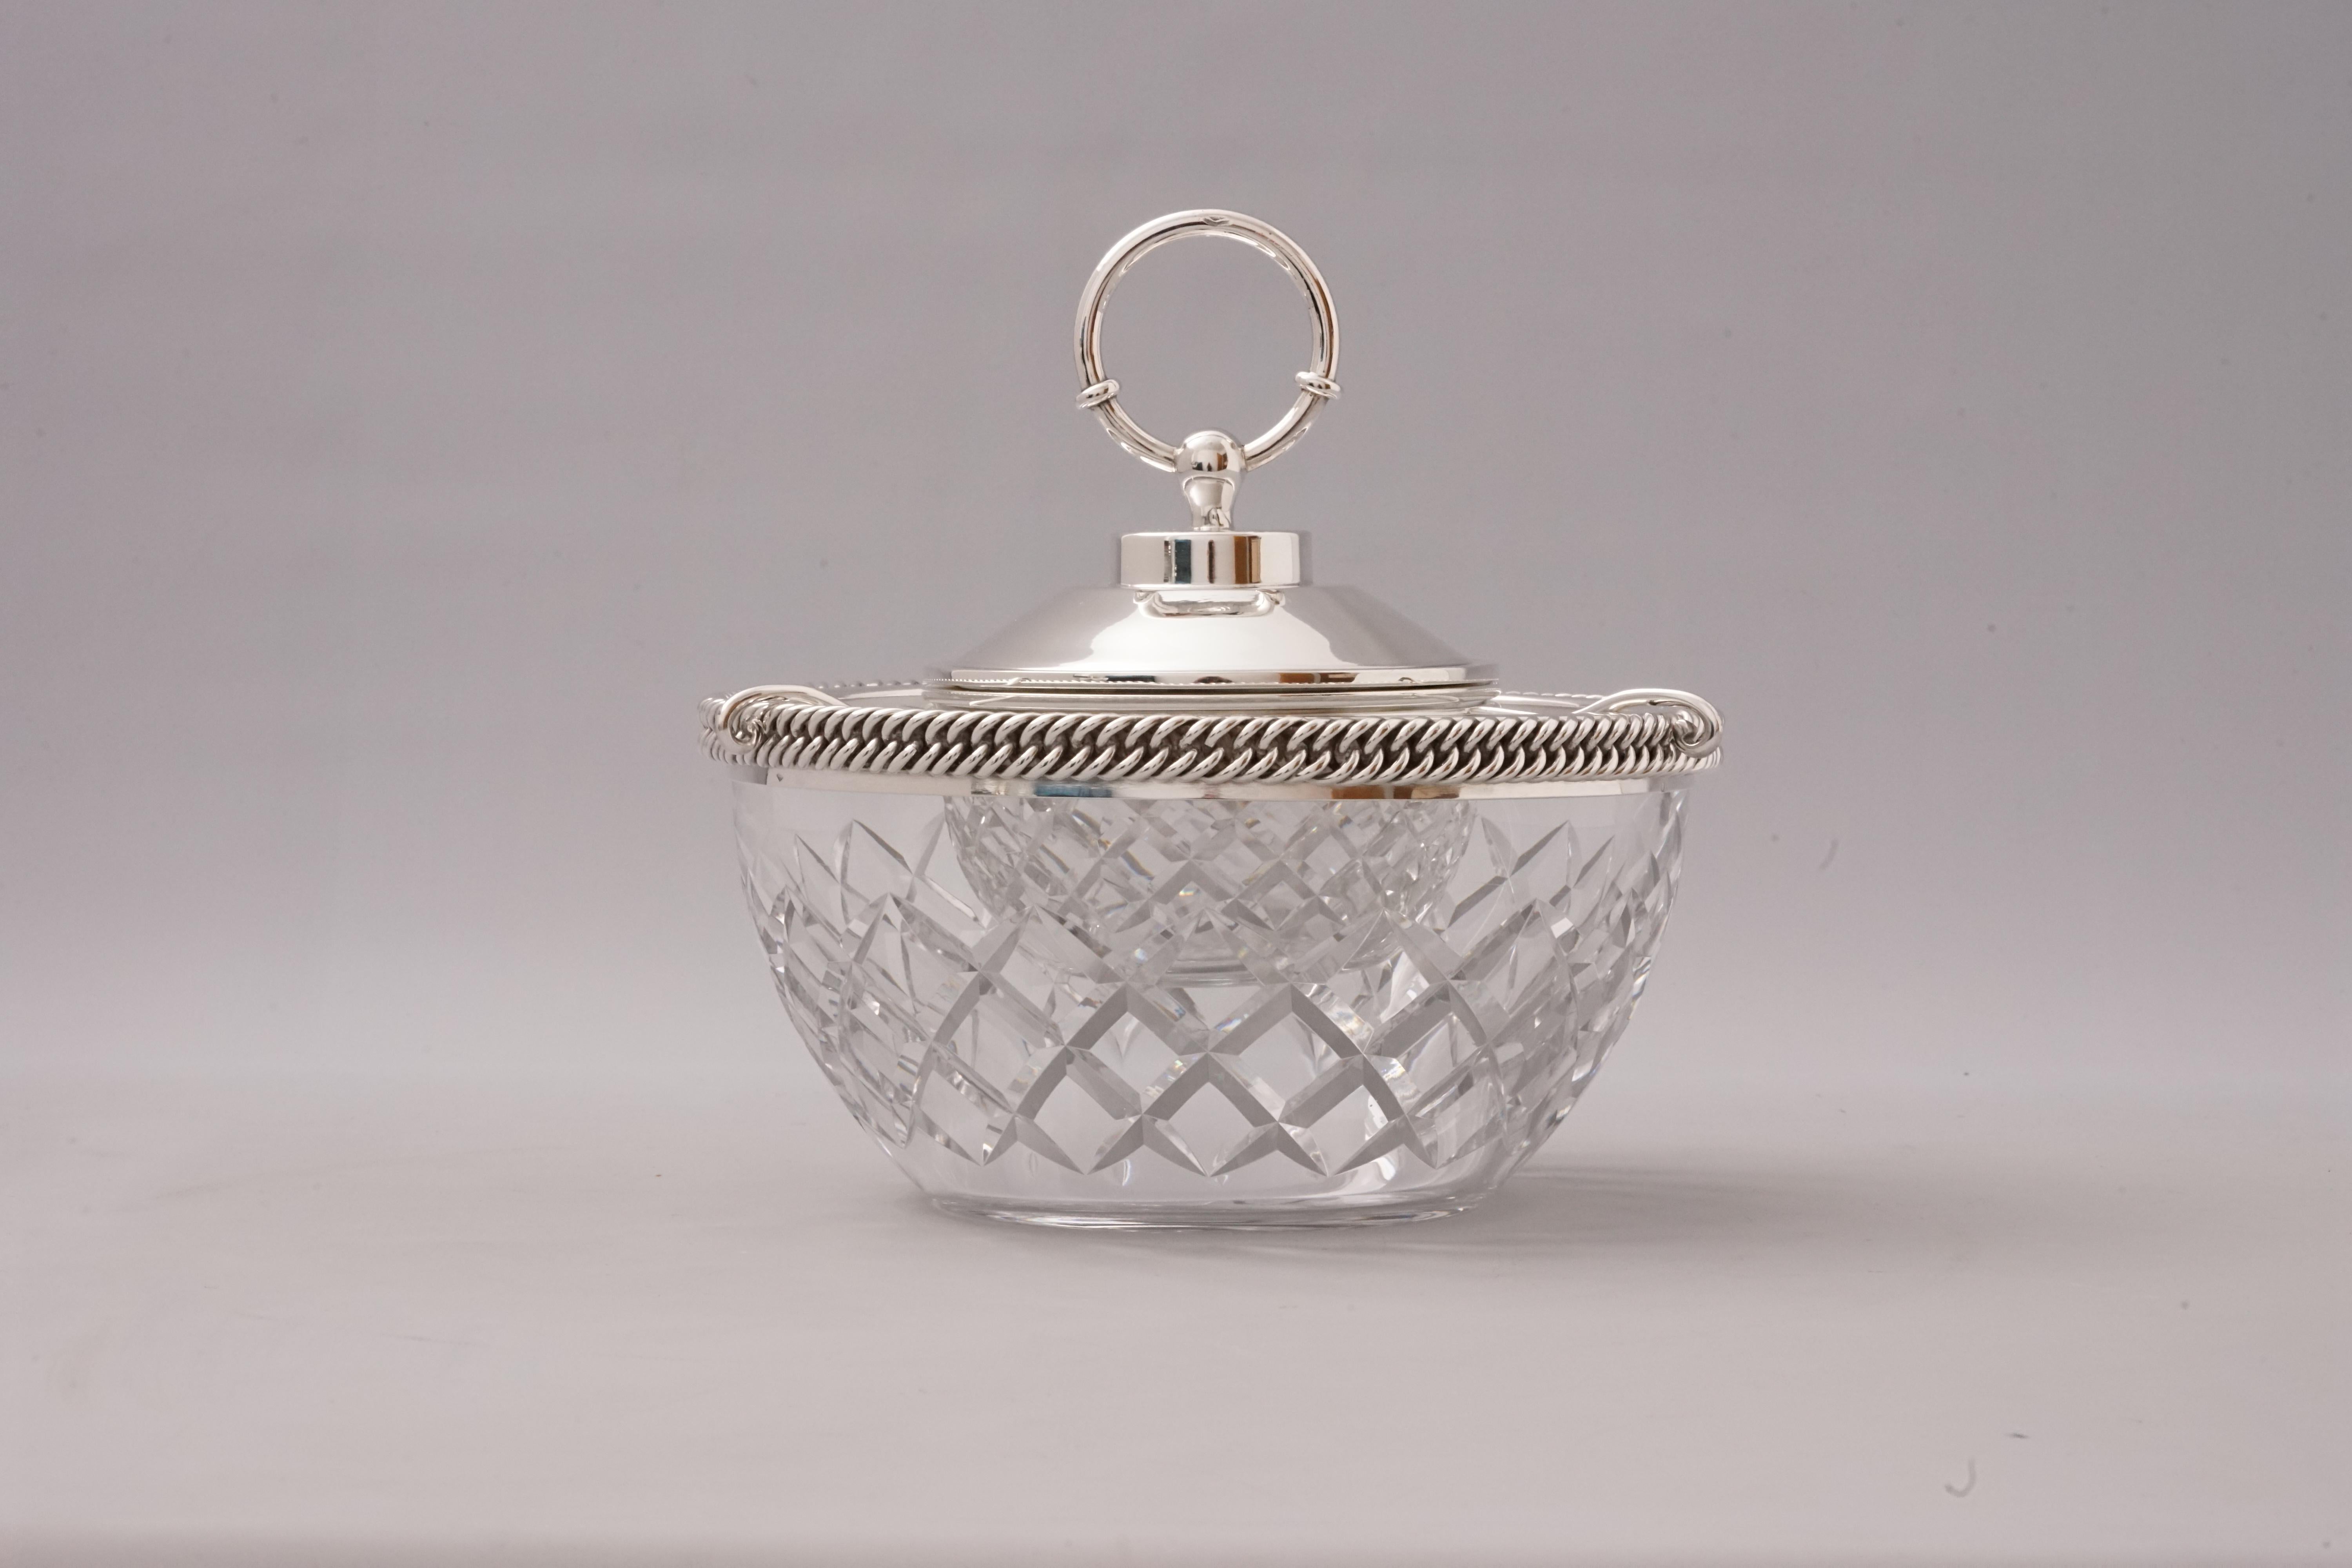 RAR large caviar dish in 925 silver and crystal by Hermès Paris. Production Period 1973-1982. Signed with “Hermès Paris”, french Minerva head and silversmith hallmark.